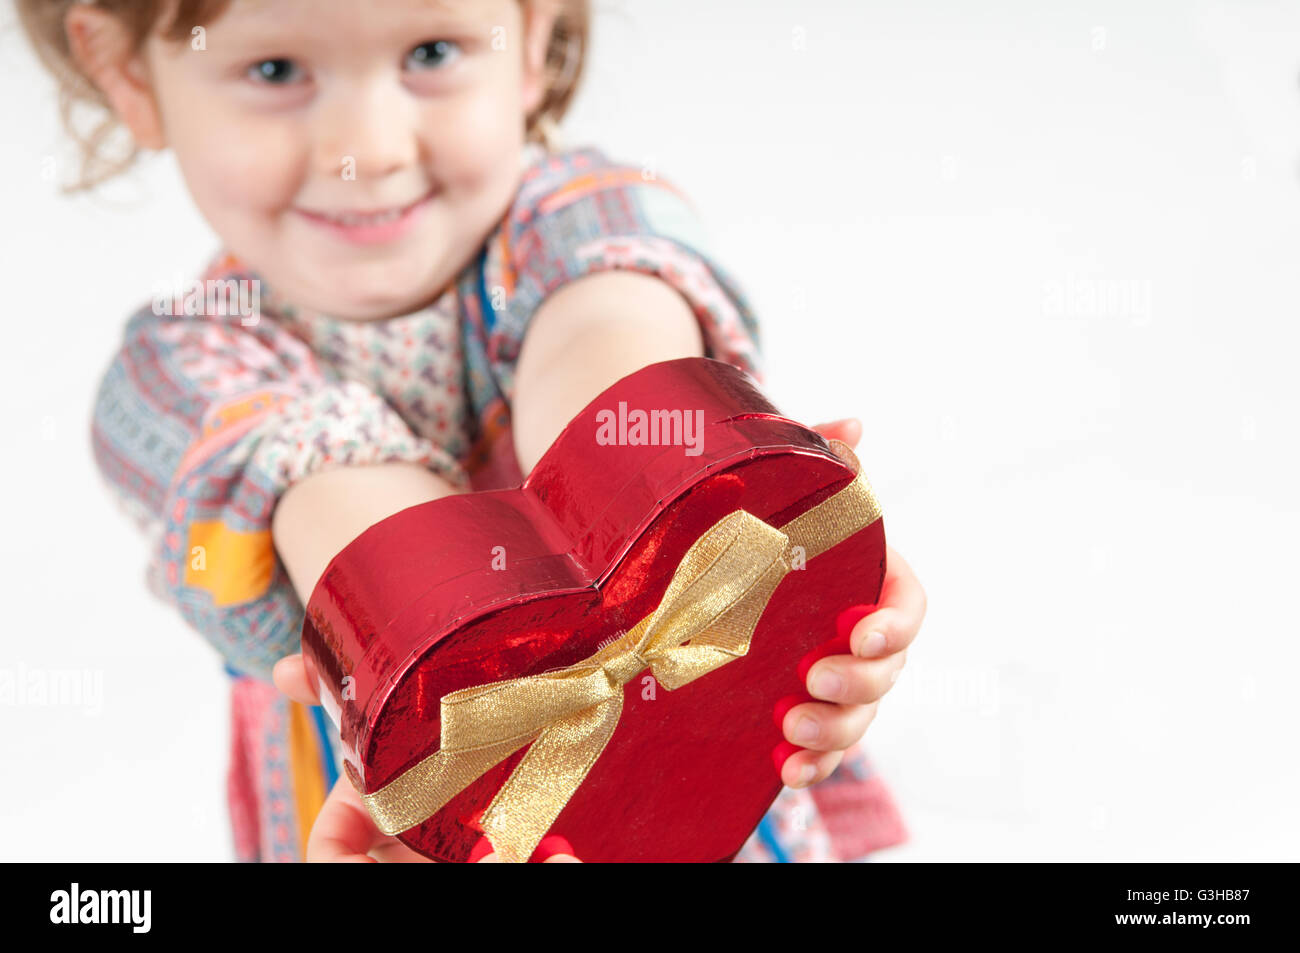 Young girl holding a gift wrapped heart shaped present Stock Photo